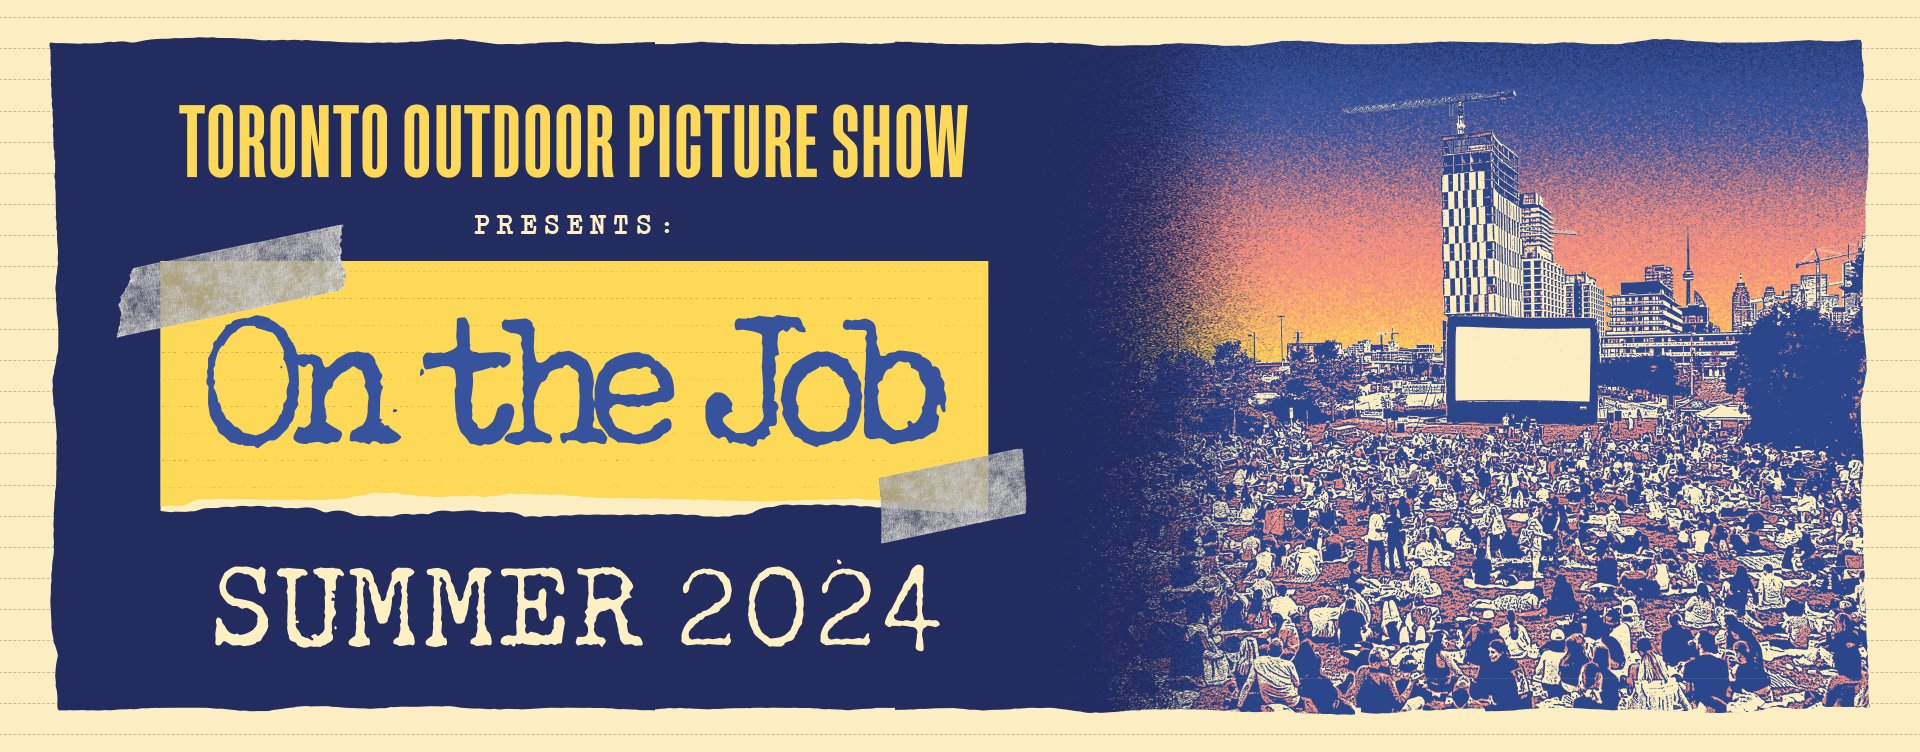 TOPS presents "On the Job" in parks across the city - Summer 2024